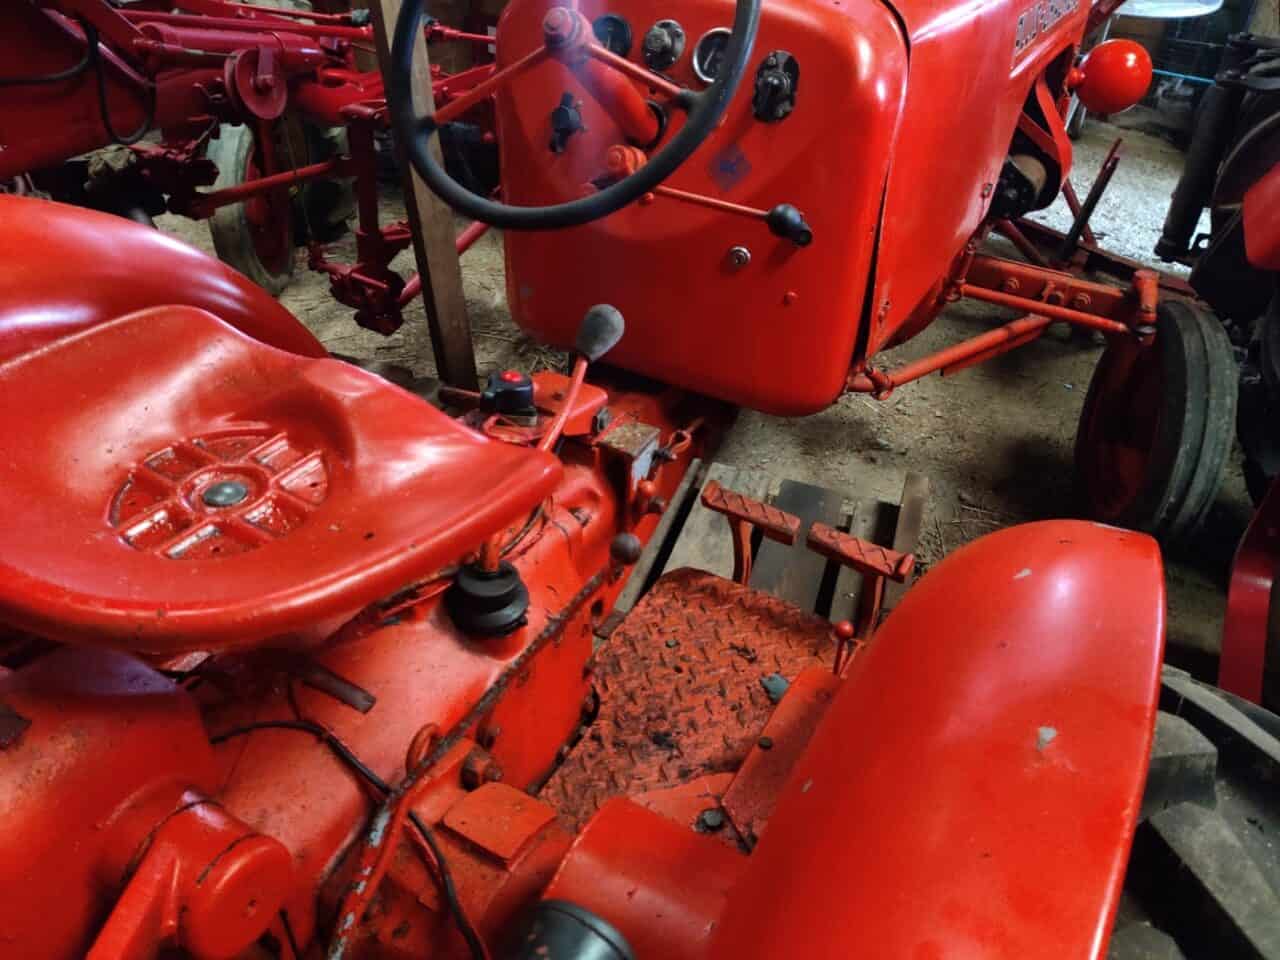 Why do tractors have two brake pedals? They're independent brakes. By the 1950s it was normal for tractors to have twin pedals to control the independent brakes. This is a 1958 Allis Chalmers D272.